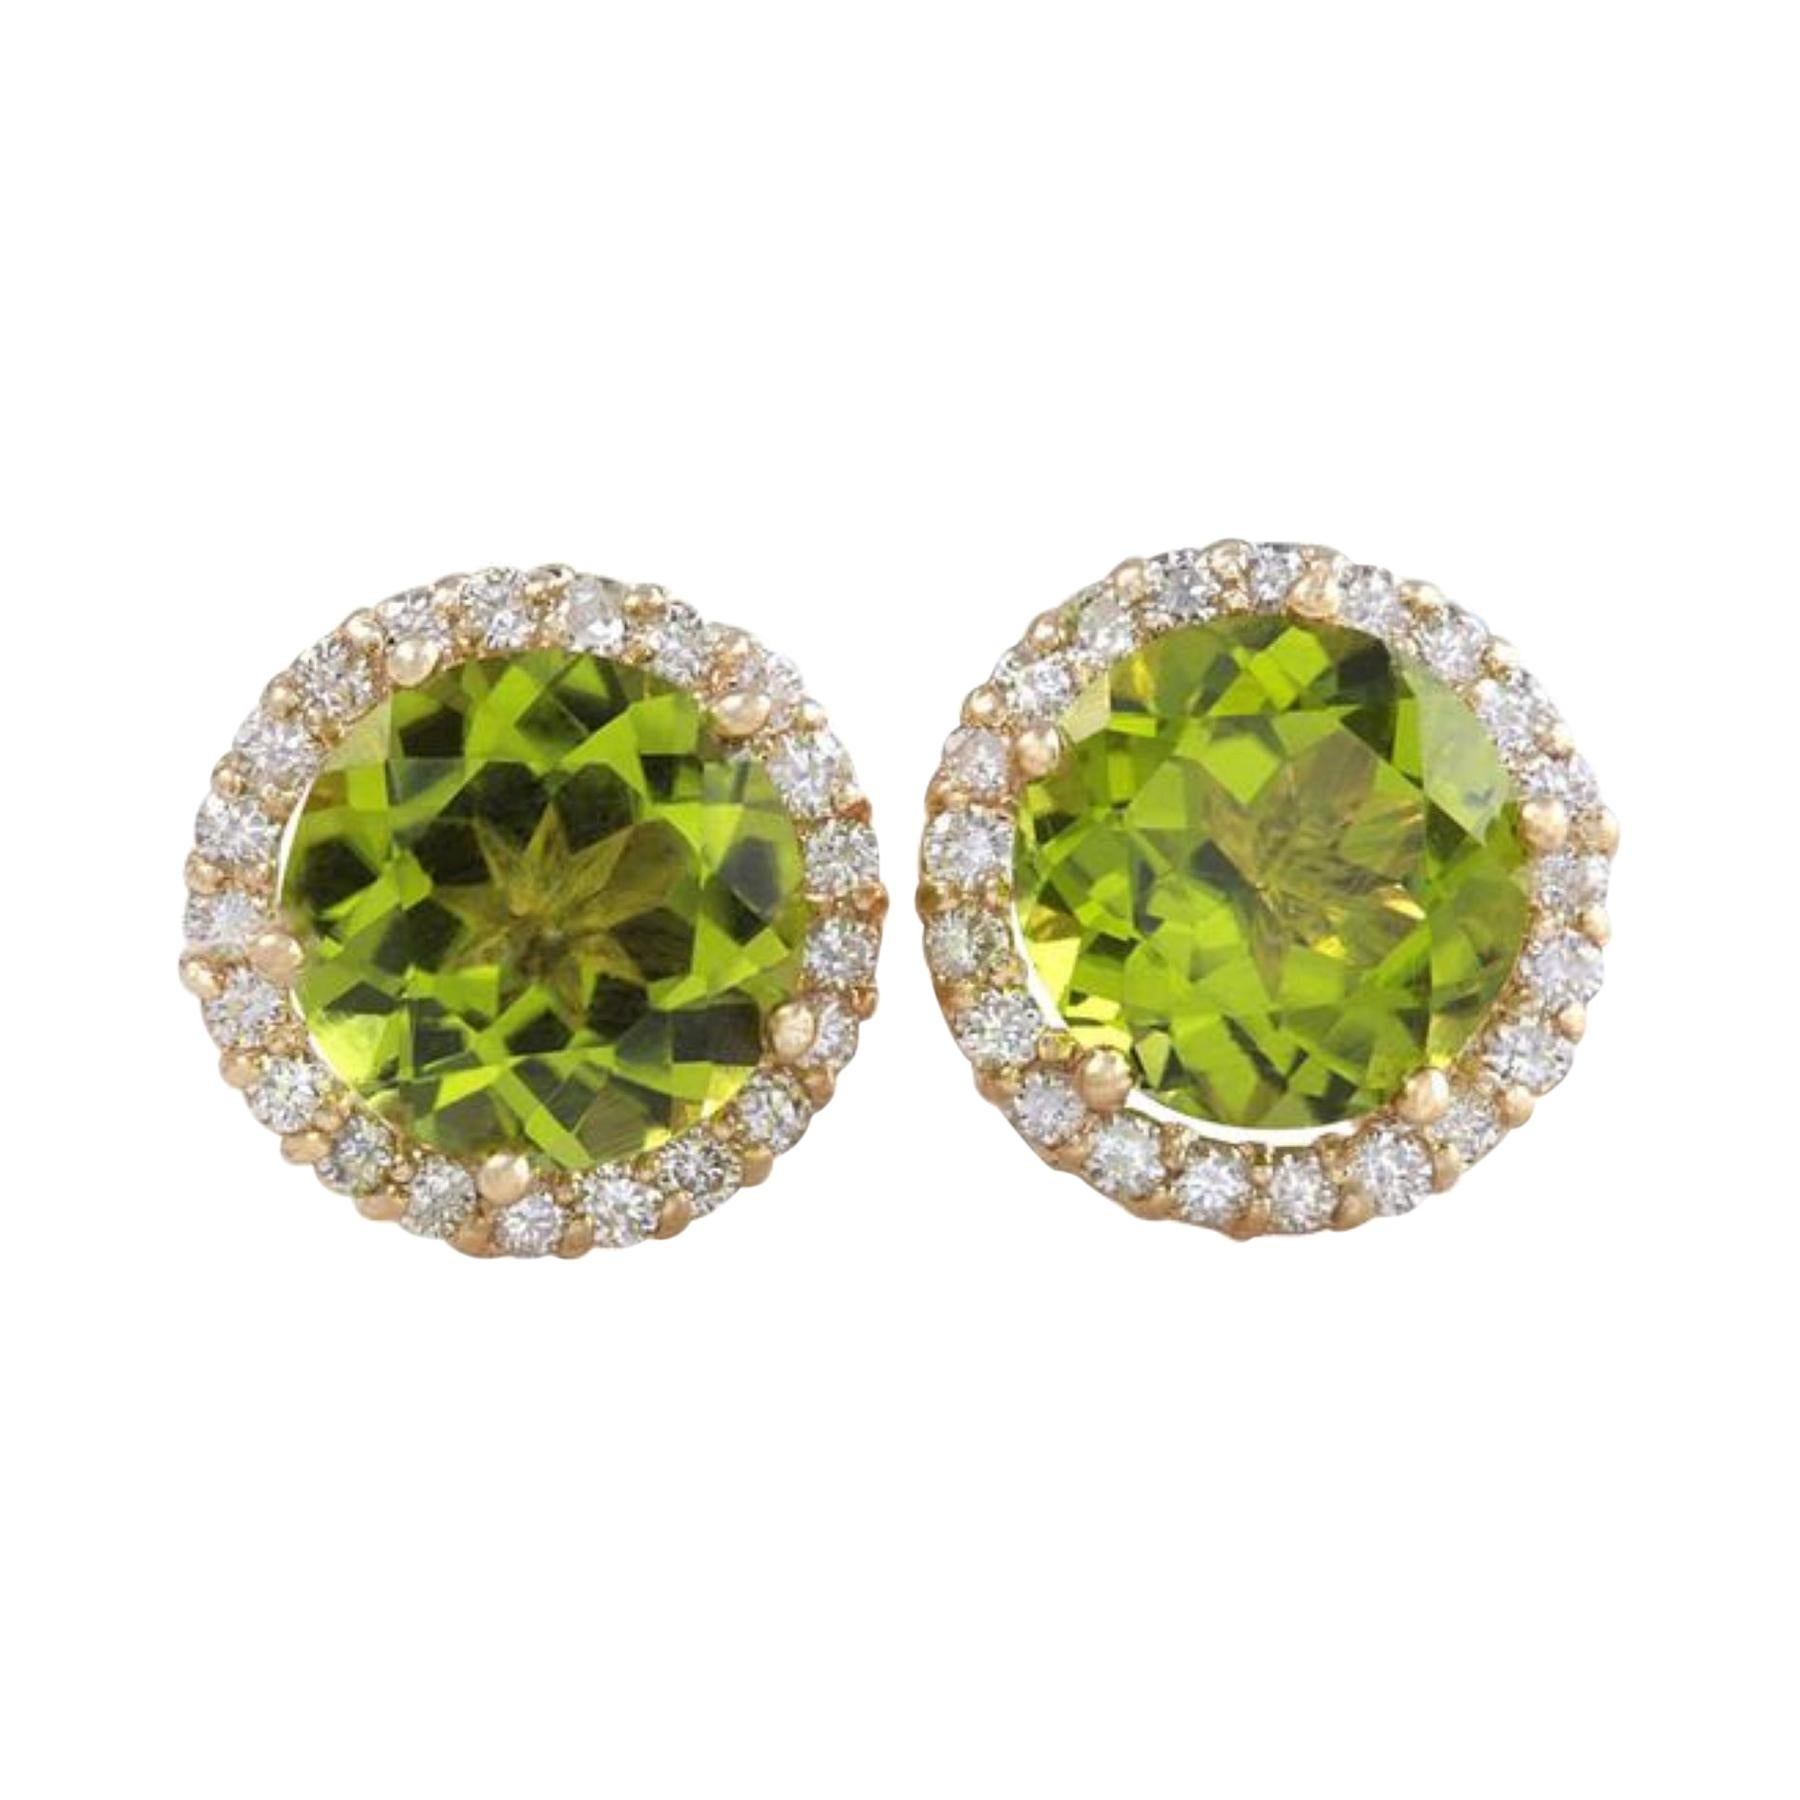 Exquisite 6.12 Carat Natural Green Peridot and Diamond 14 Karat Solid Gold For Sale